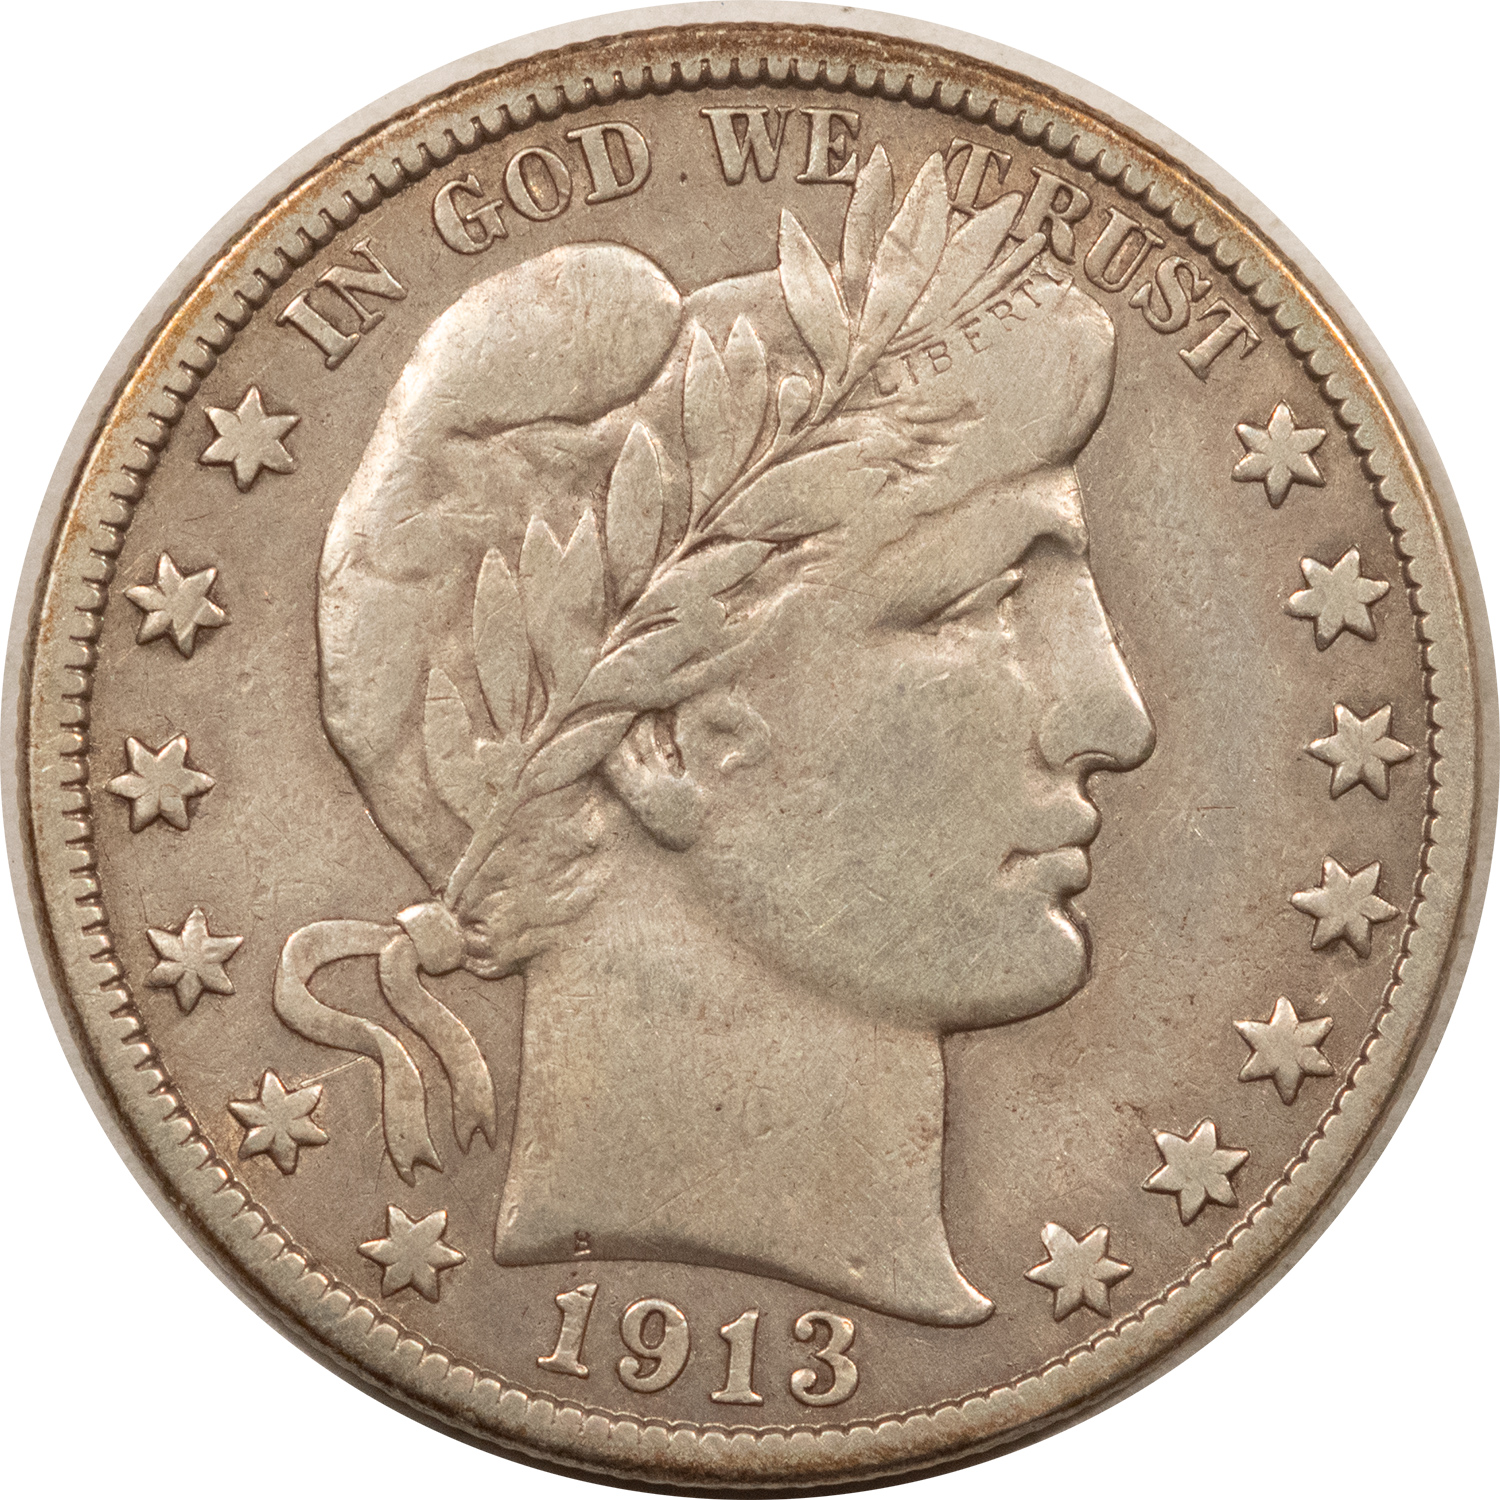 1913-S BARBER HALF DOLLAR - HIGH GRADE CIRCULATED EXAMPLE! OLD CLEANING!